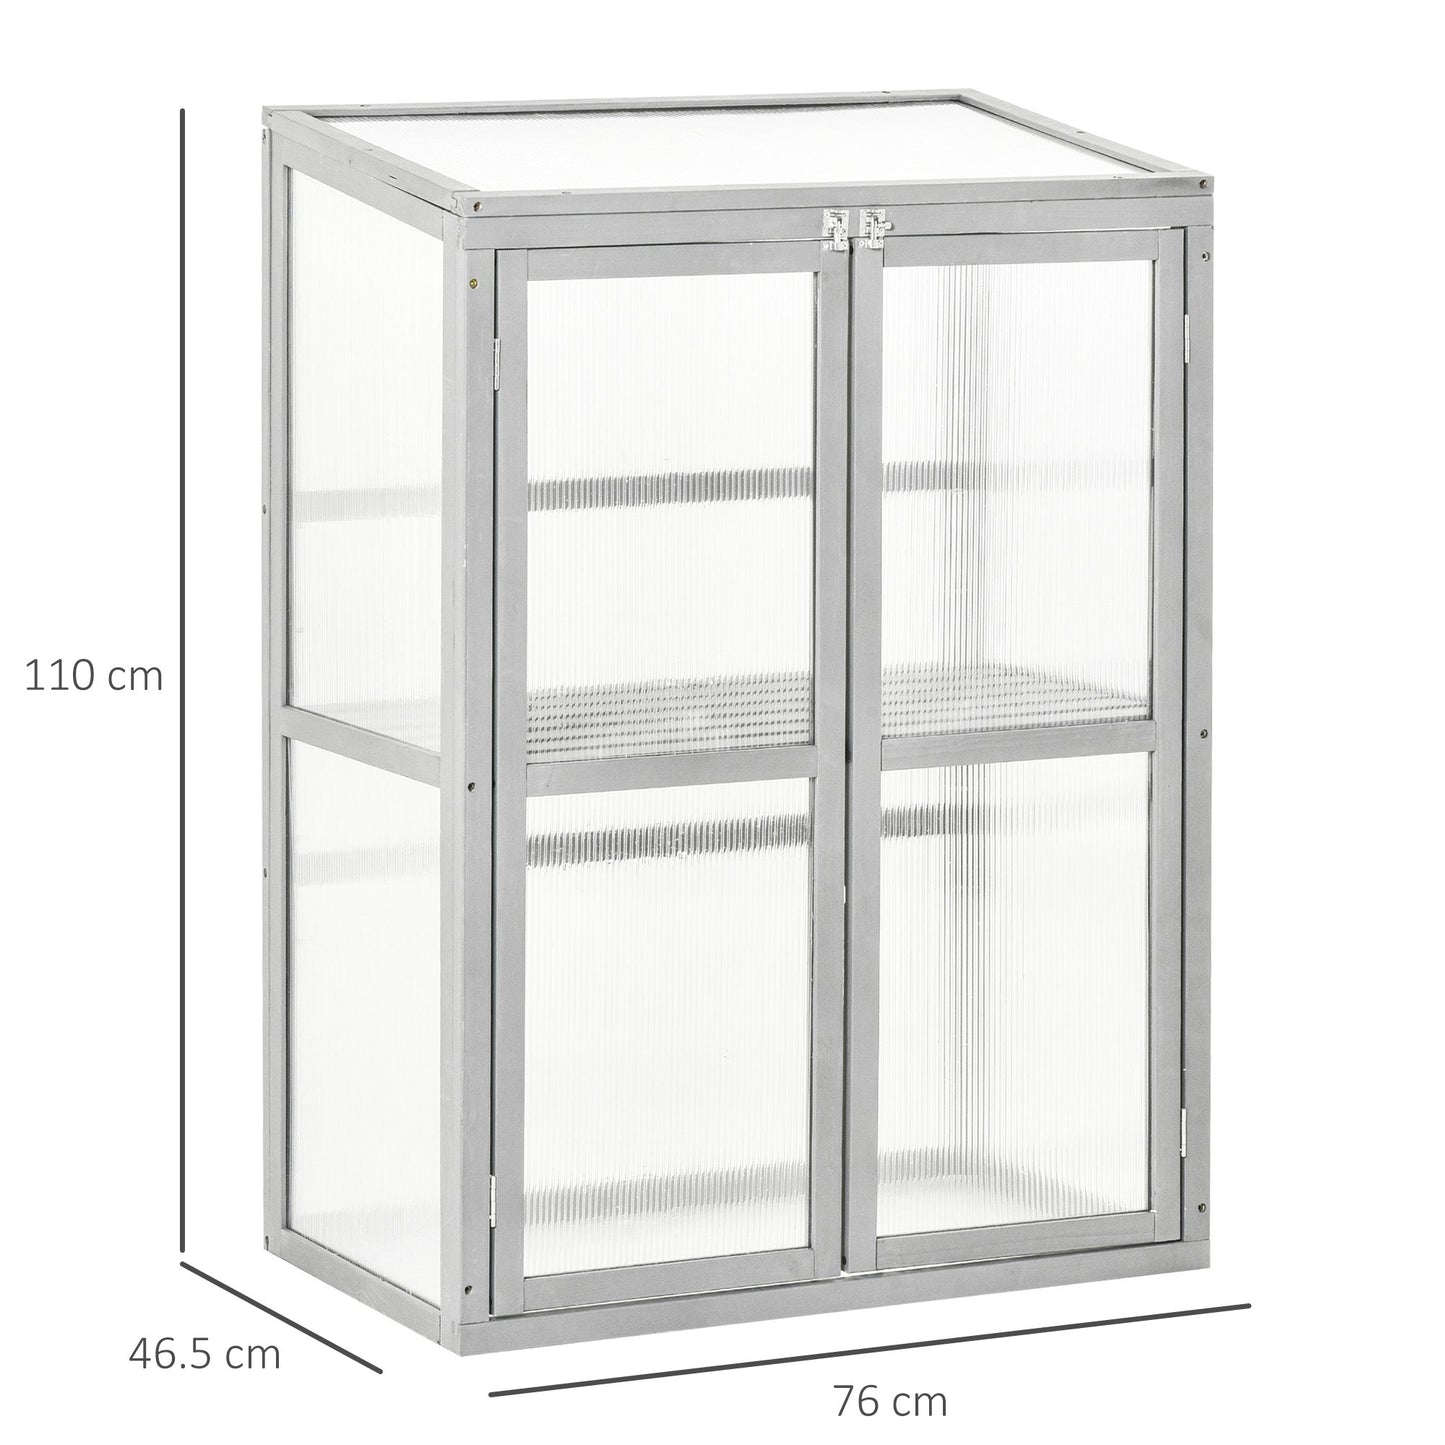 Outsunny Polycarbonate Cold Frame Greenhouse: Wooden Grow House with Adjustable Shelf & Double Doors, Slate Grey